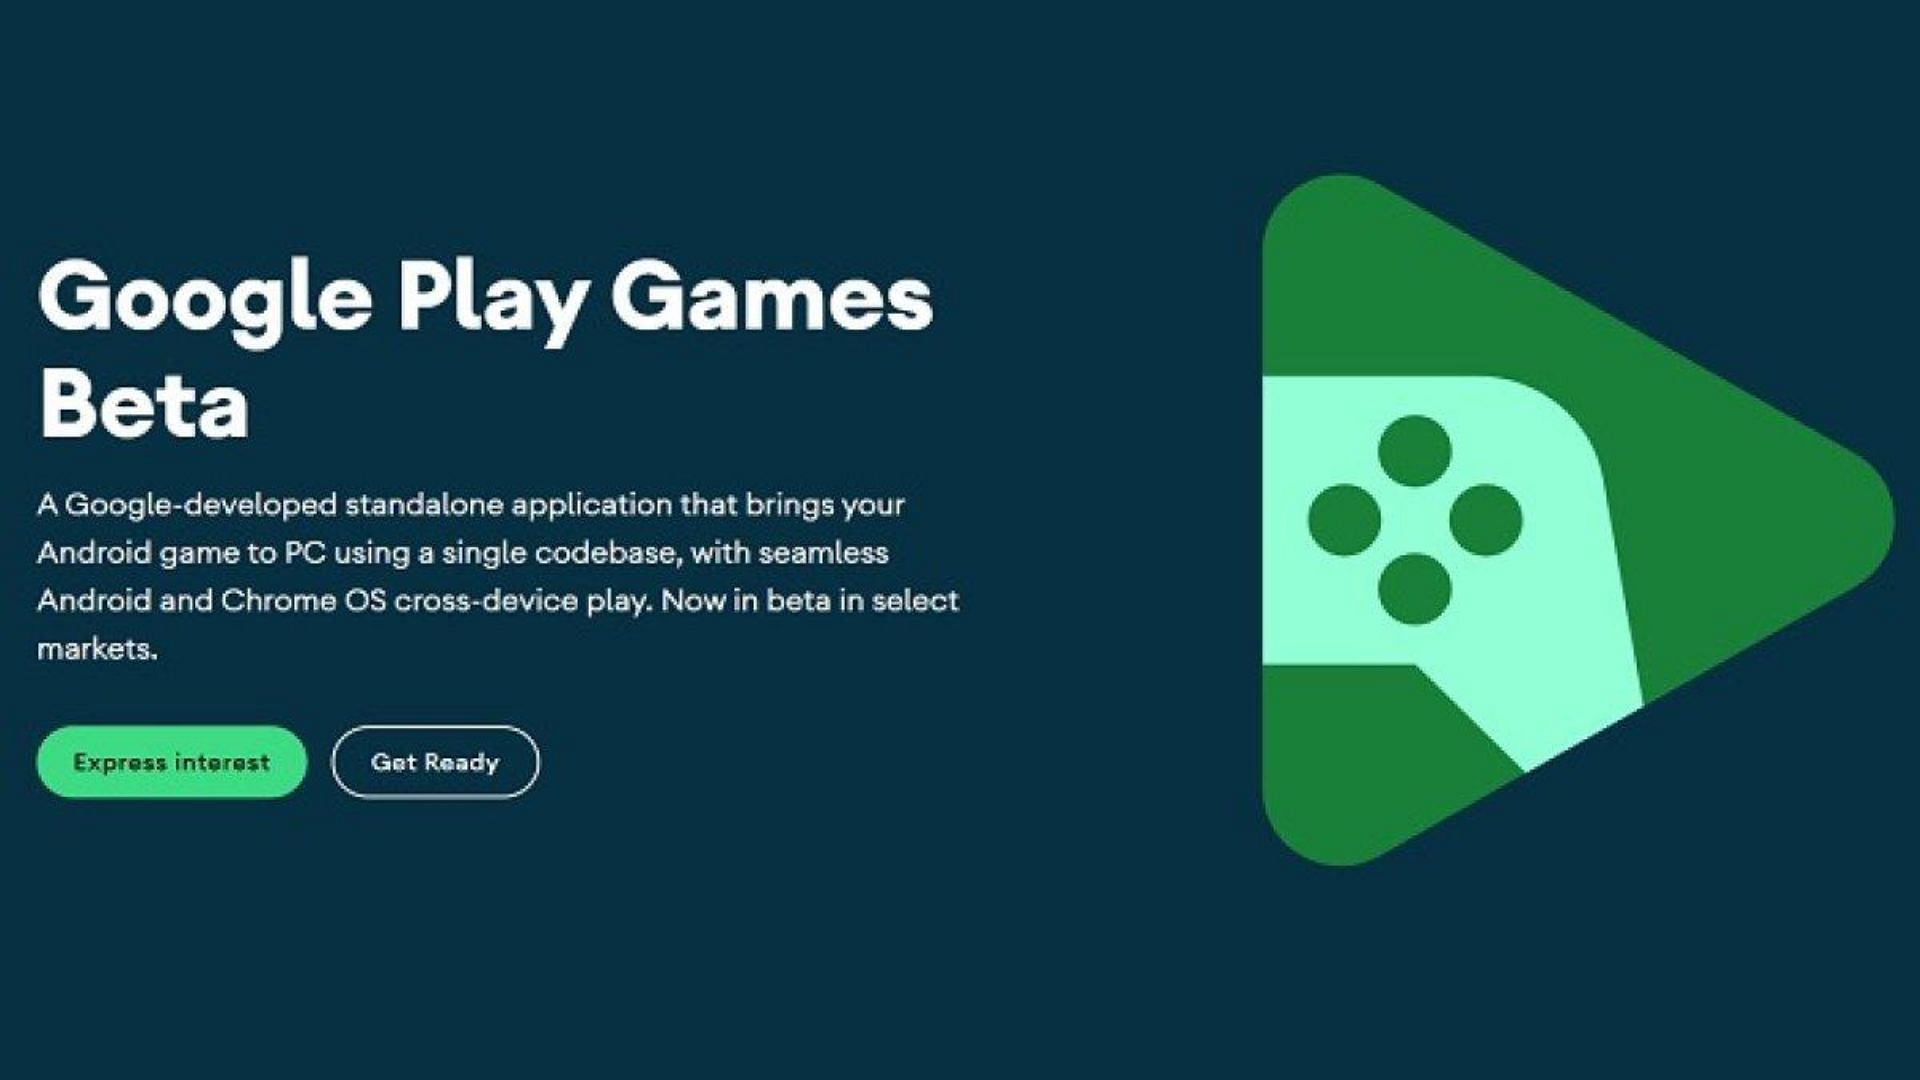 Google Play Games beta announced at TGA 2022, set to offer gamers